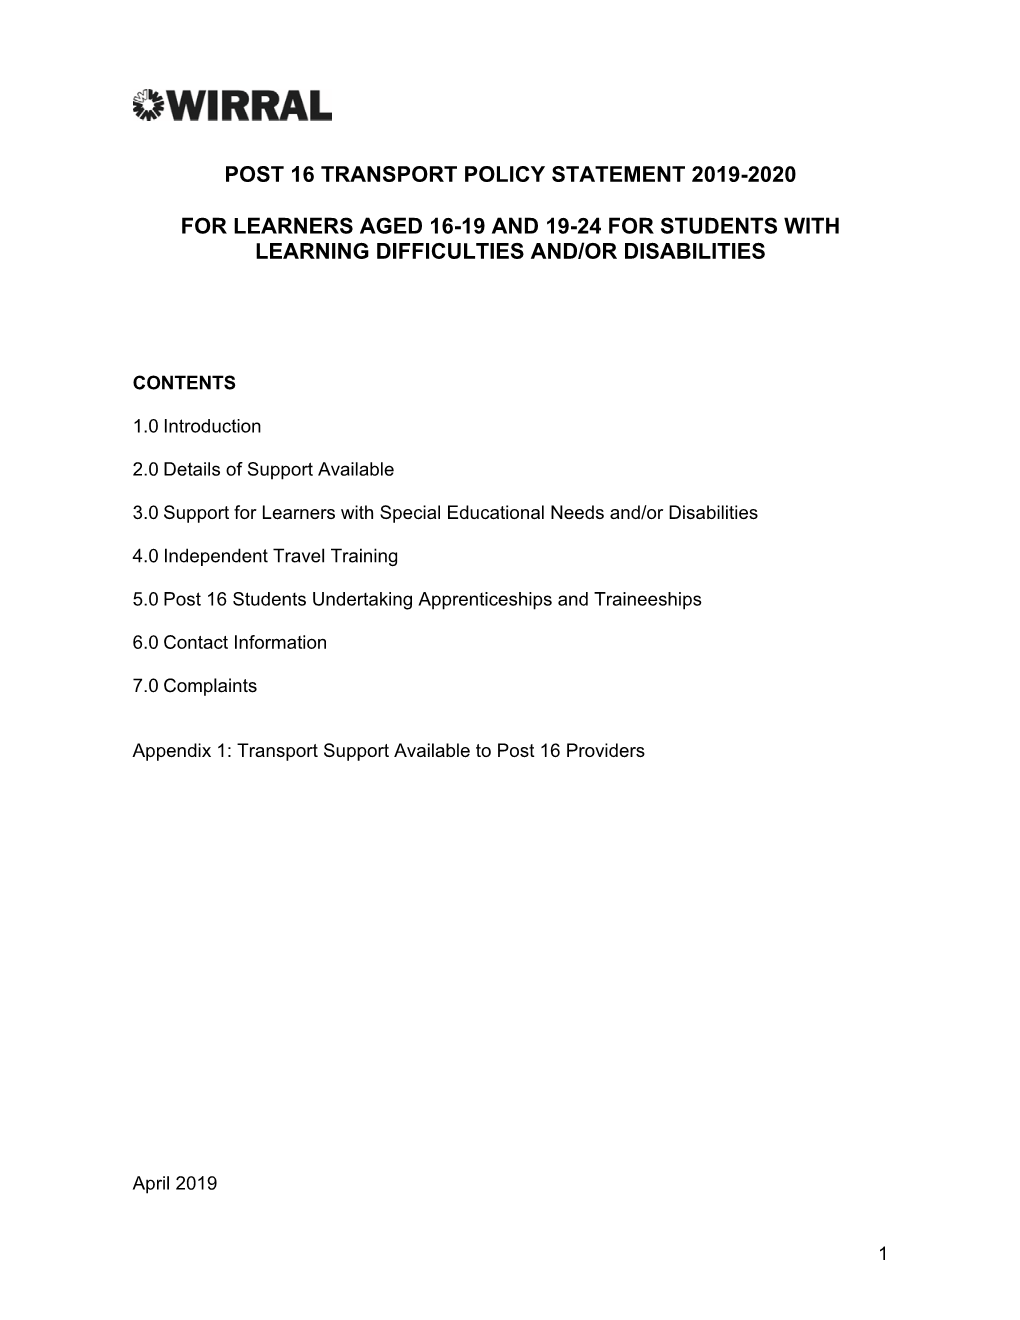 Transport Policy Statement 2019 for Young People Over 16